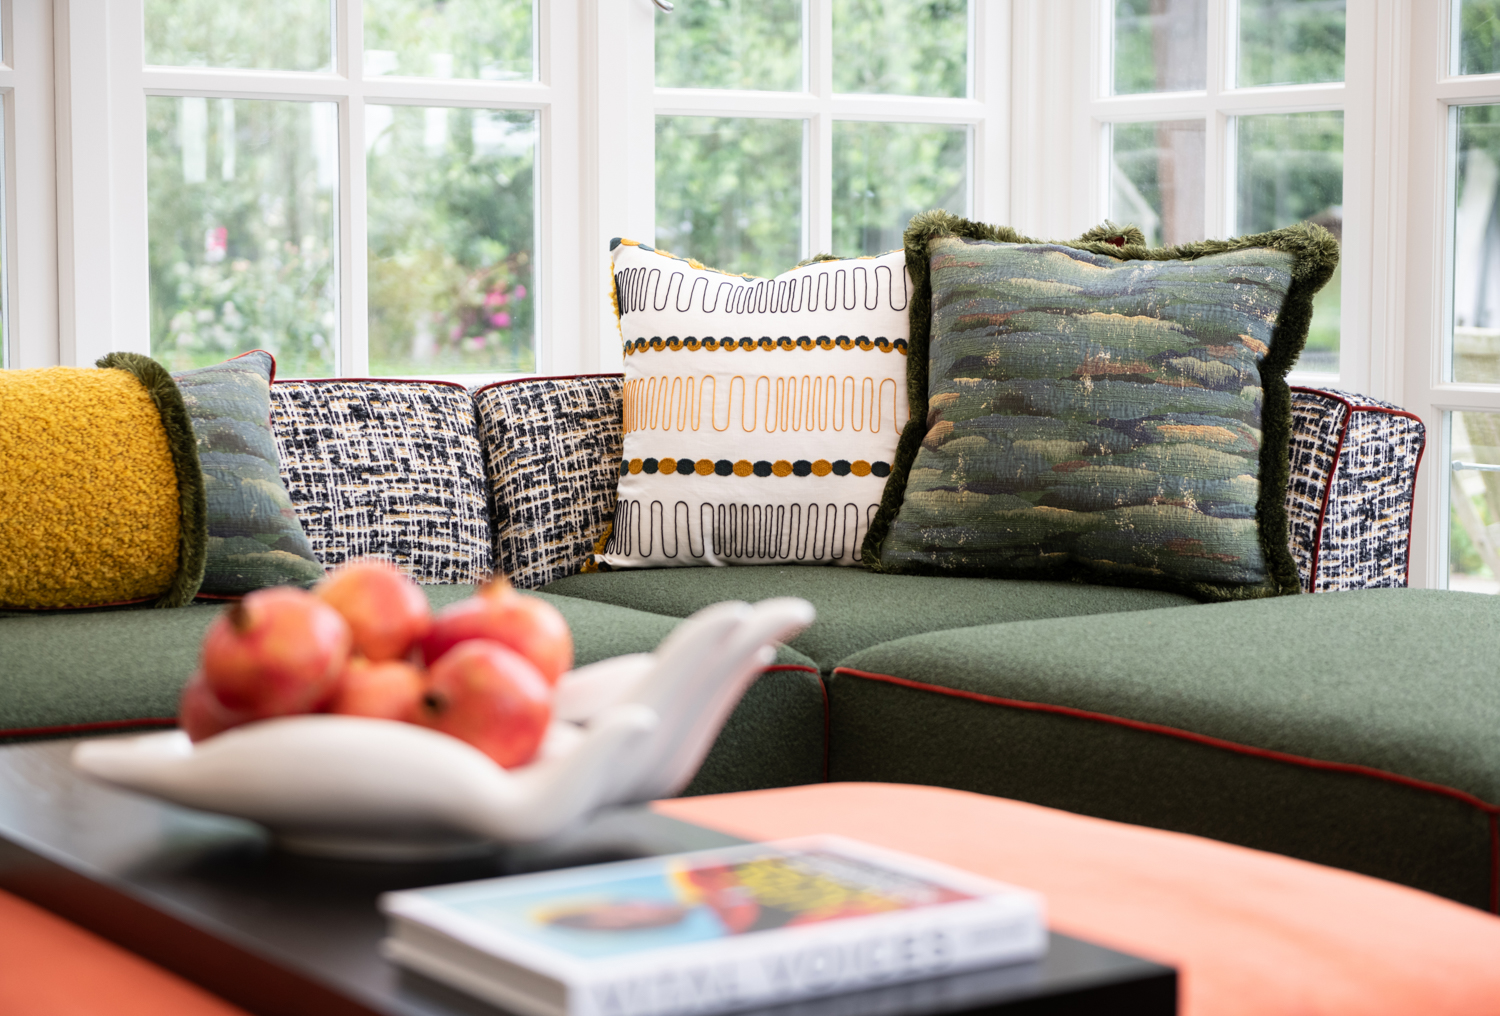 Sectional seating featuring decorative throw pillows.